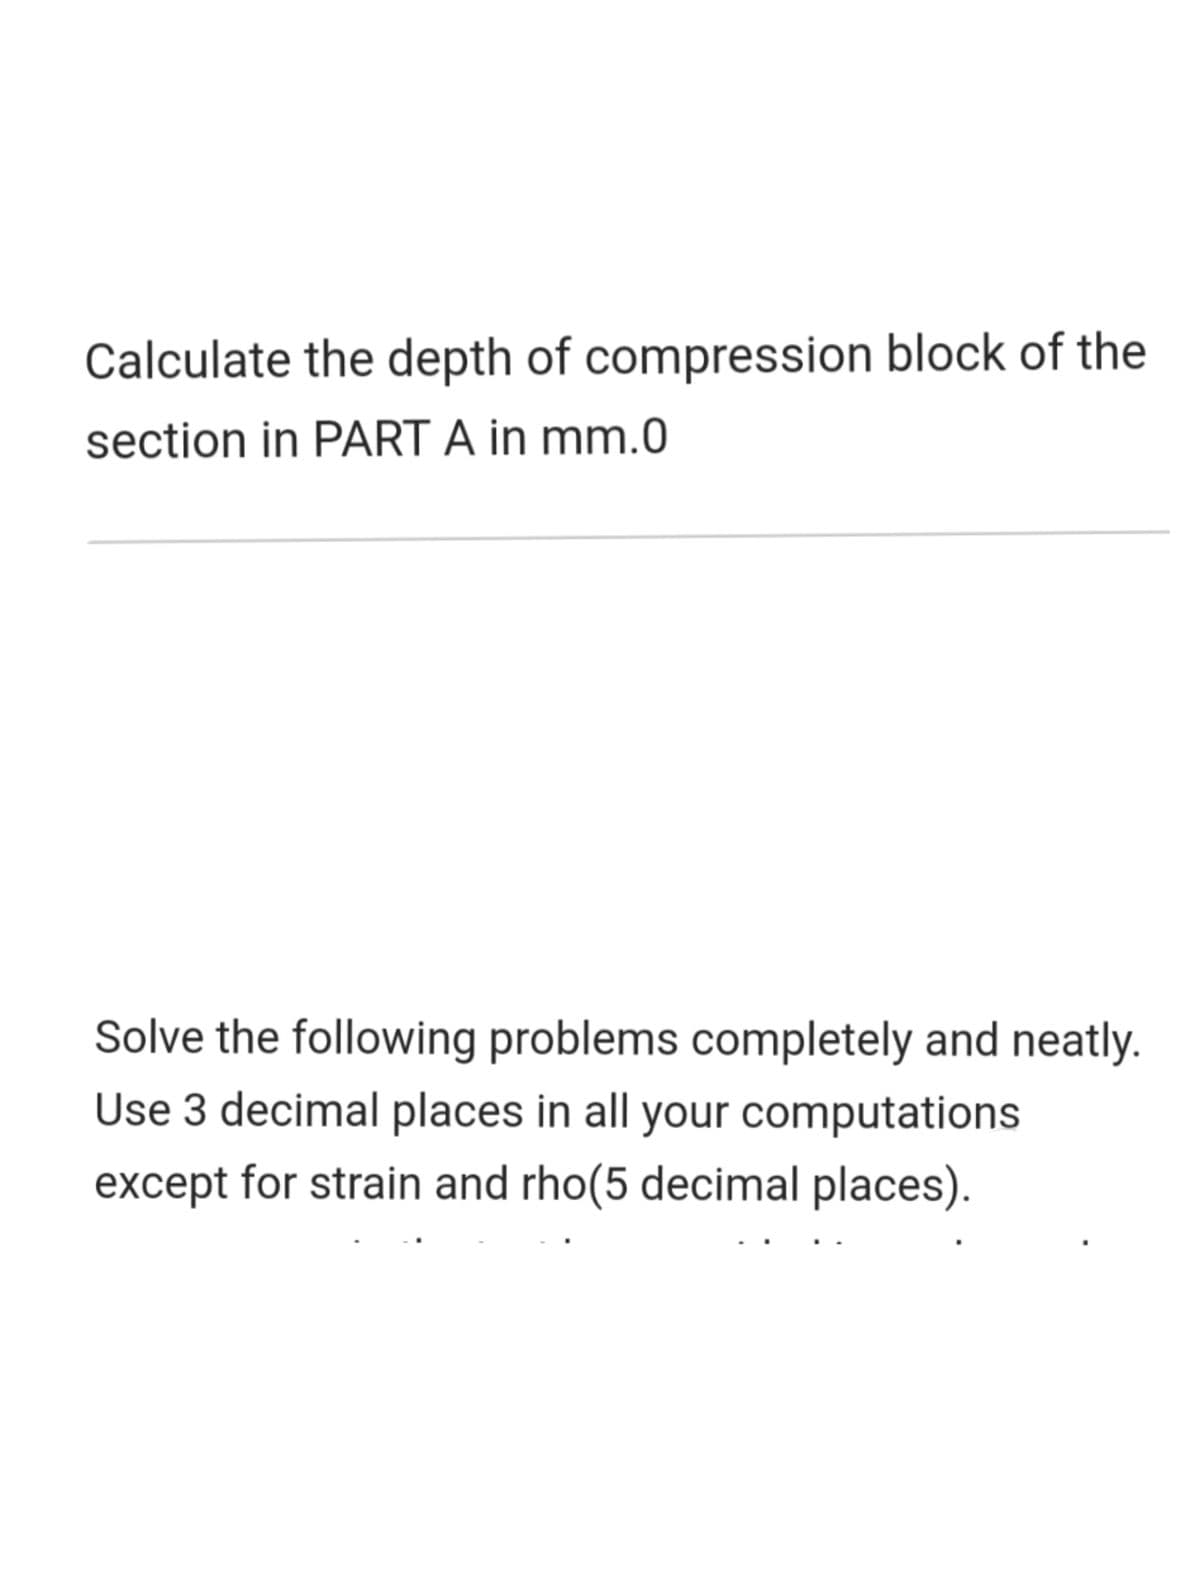 Calculate the depth of compression block of the
section in PART A in mm.0
Solve the following problems completely and neatly.
Use 3 decimal places in all your computations
except for strain and rho(5 decimal places).